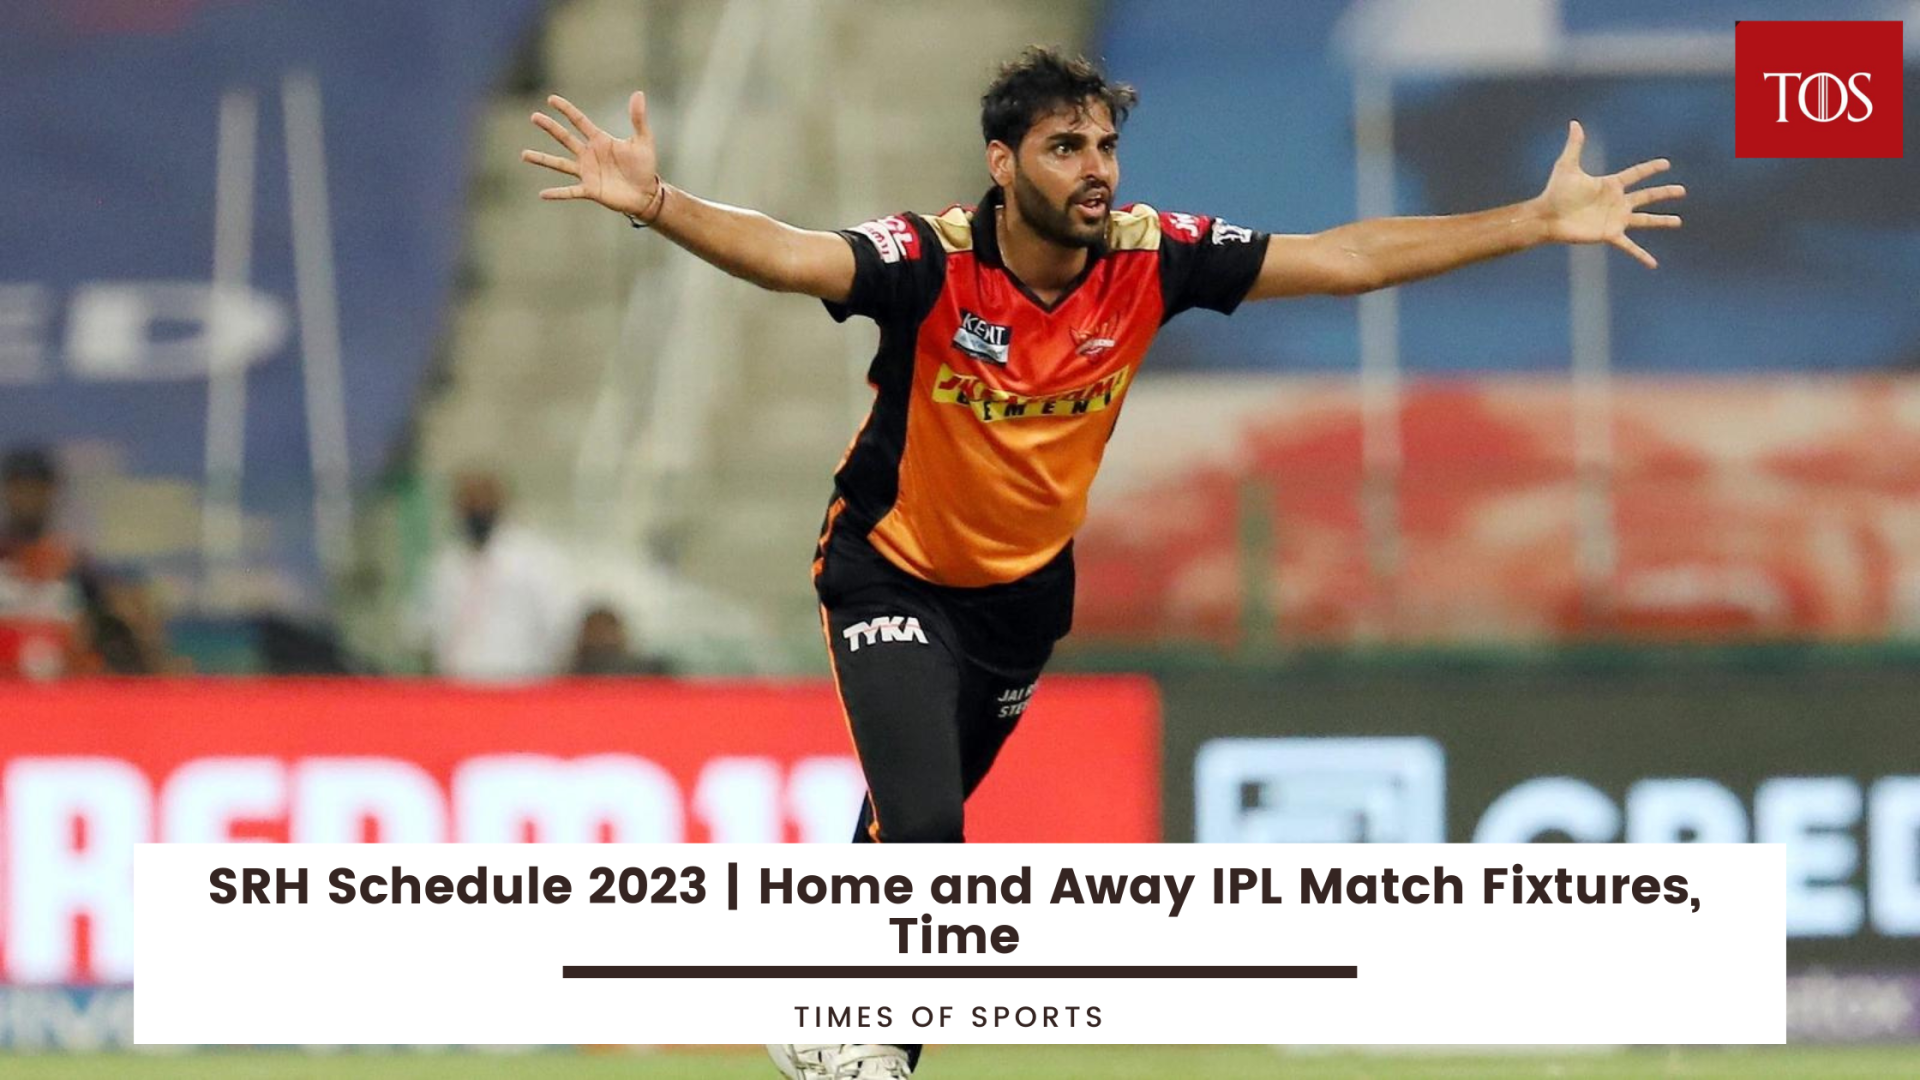 SRH Schedule 2023 Home and Away IPL Match Fixtures, Time